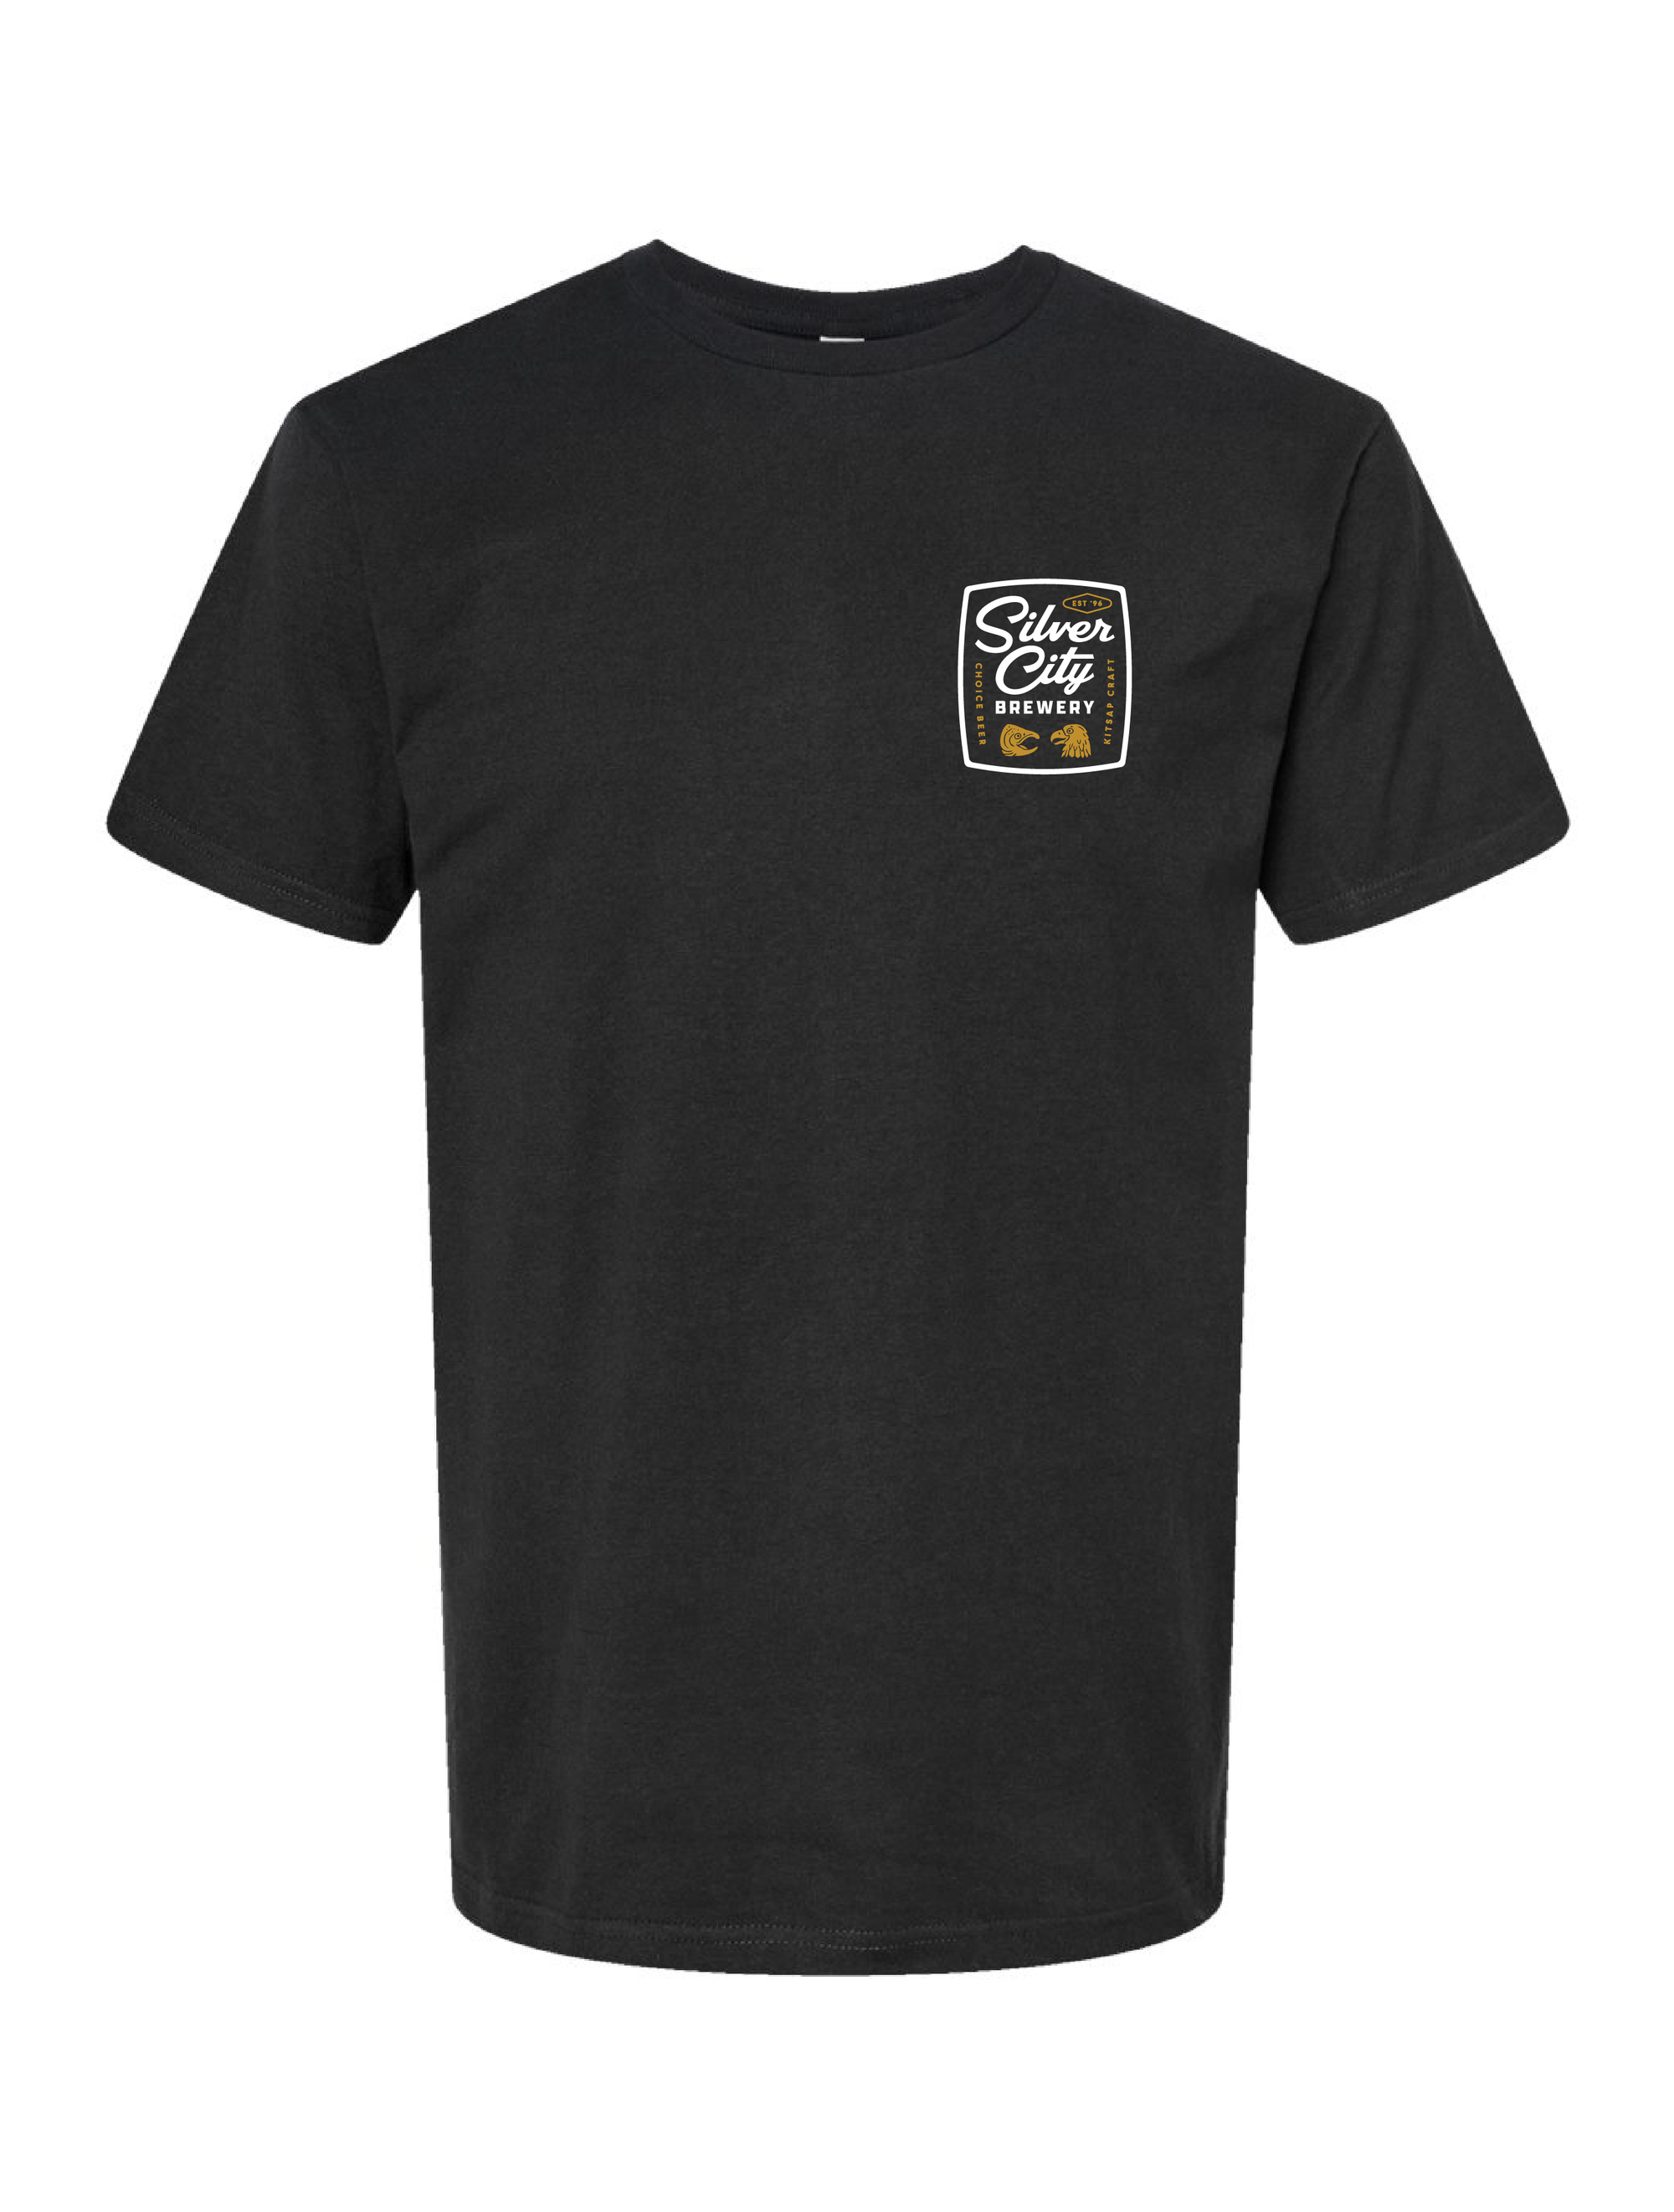 Silver City Brewery · Choice Beer Tee